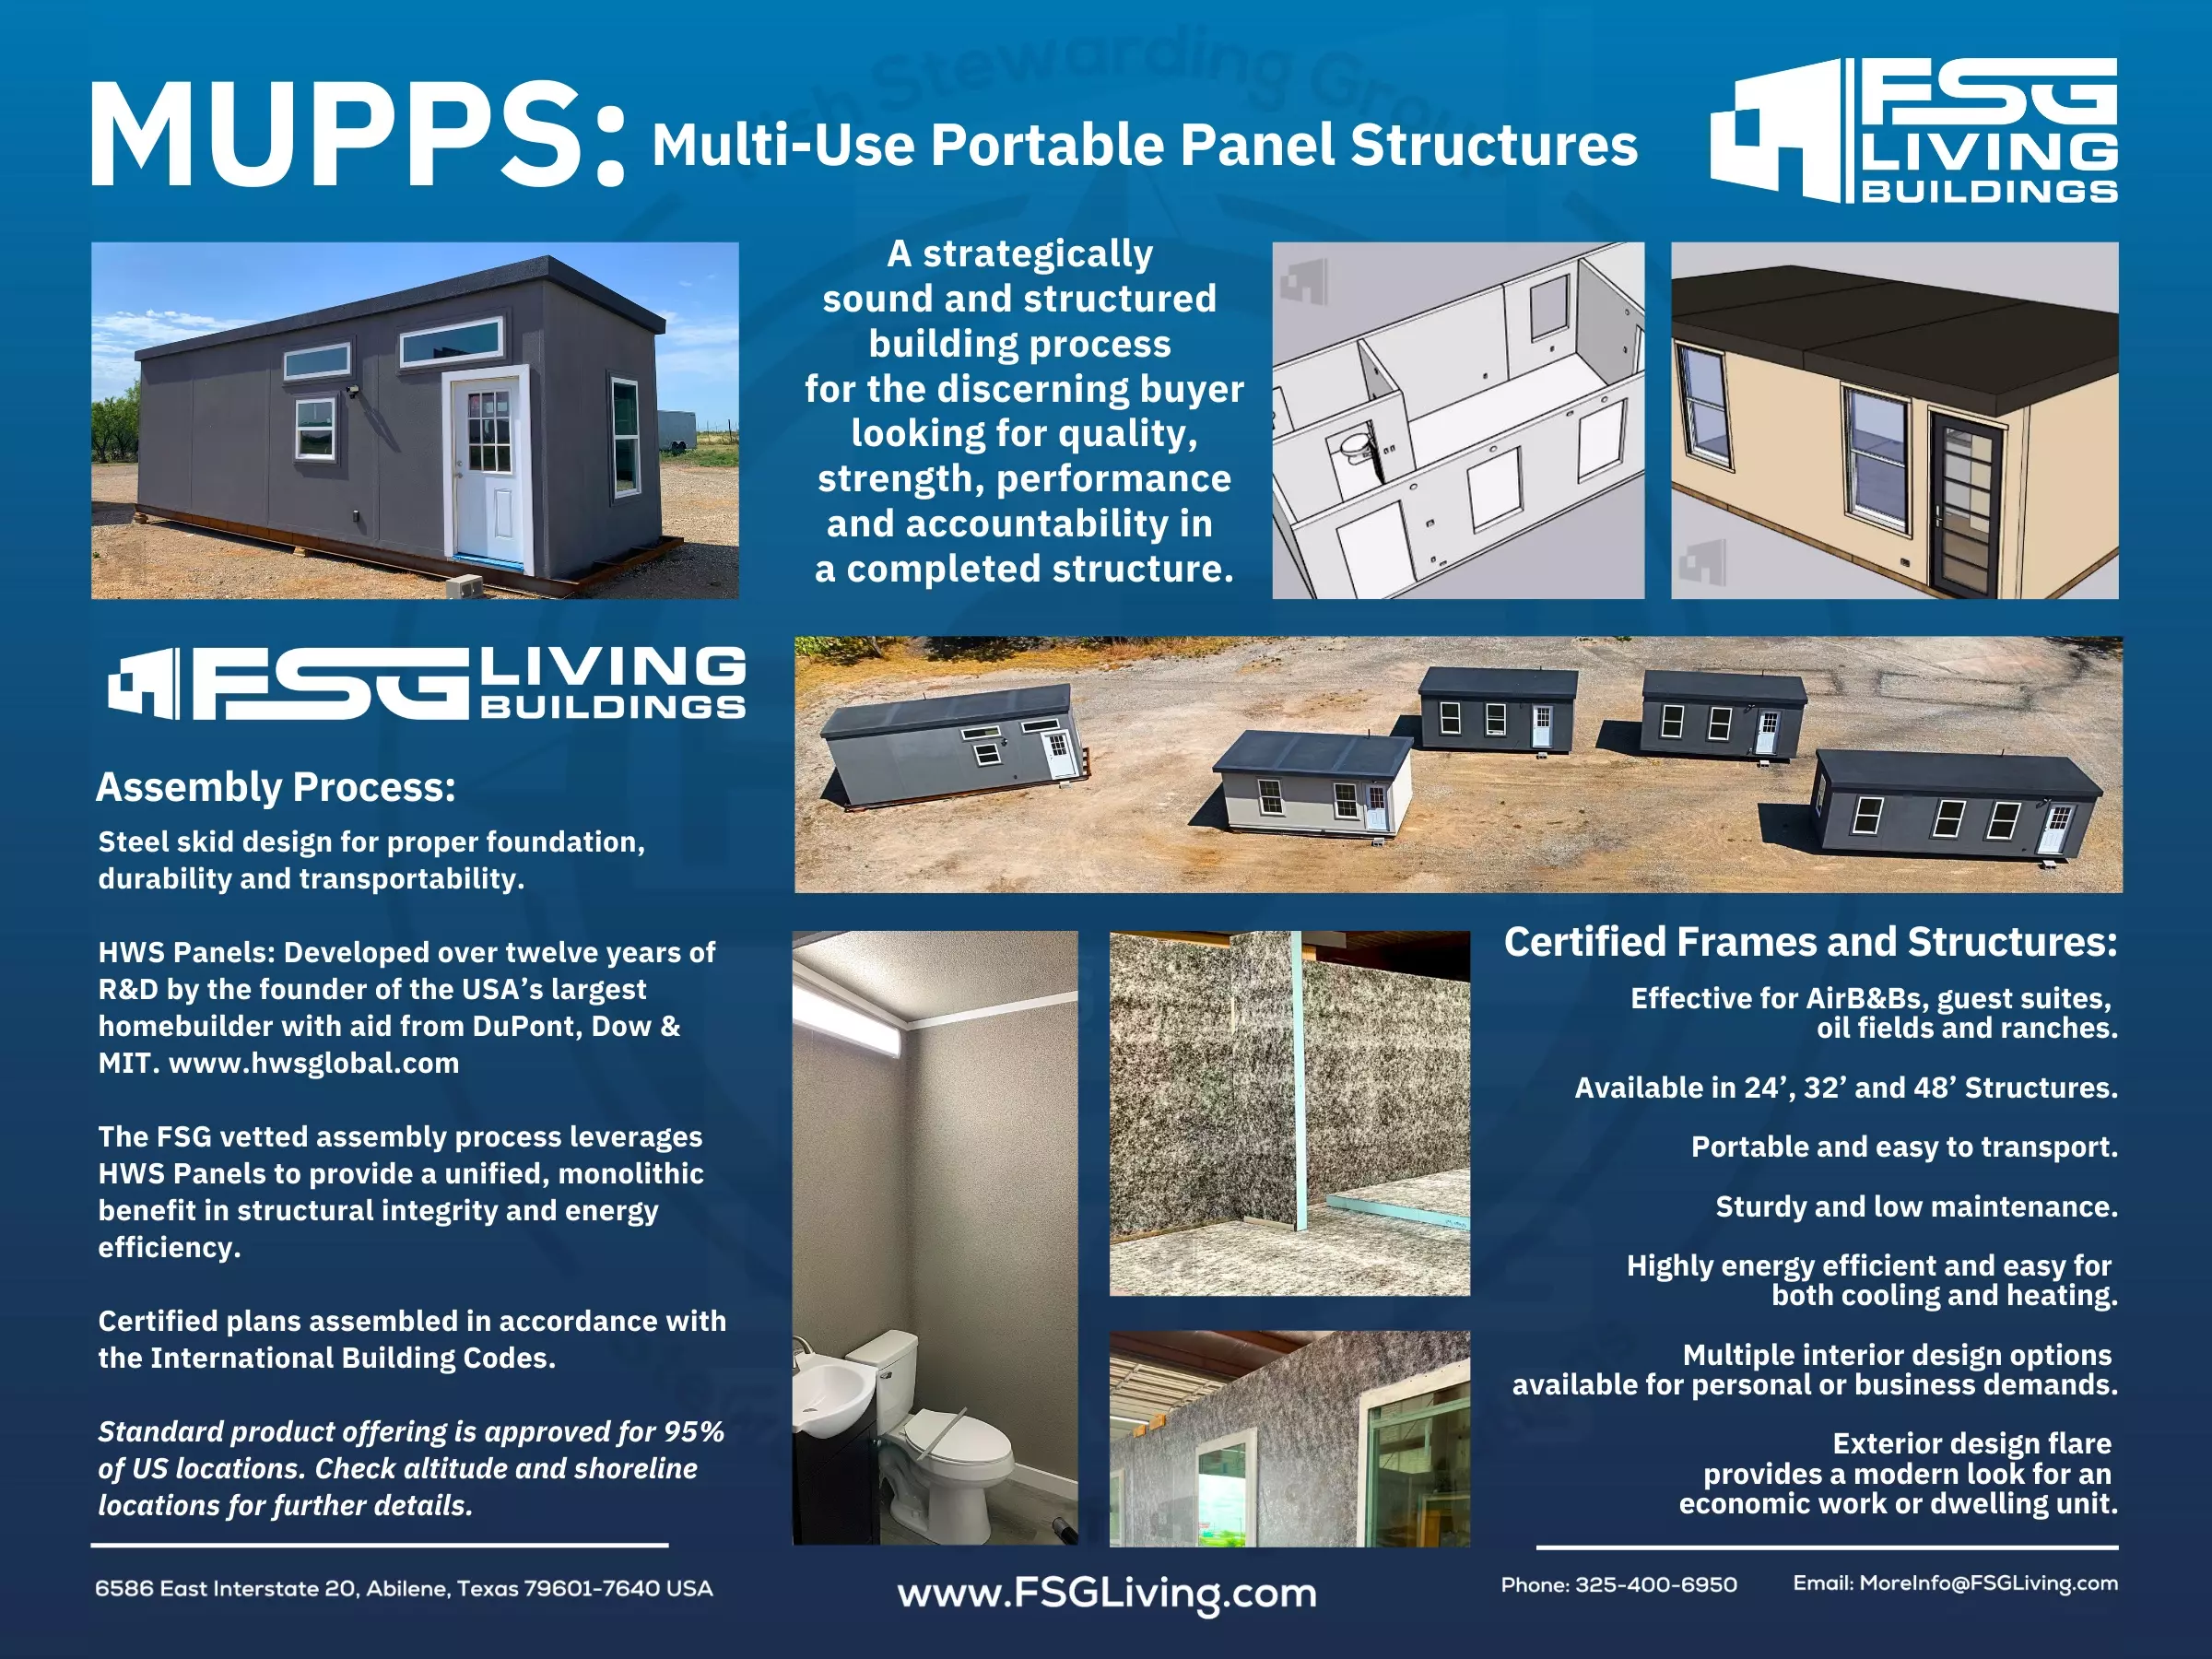 A blue background with a series of different pictures of the structures as well as content that shares about the assembly process as well as info on the certified frames and structures. There are also the logos for FSG Living Buildings and the MUPPS logo.